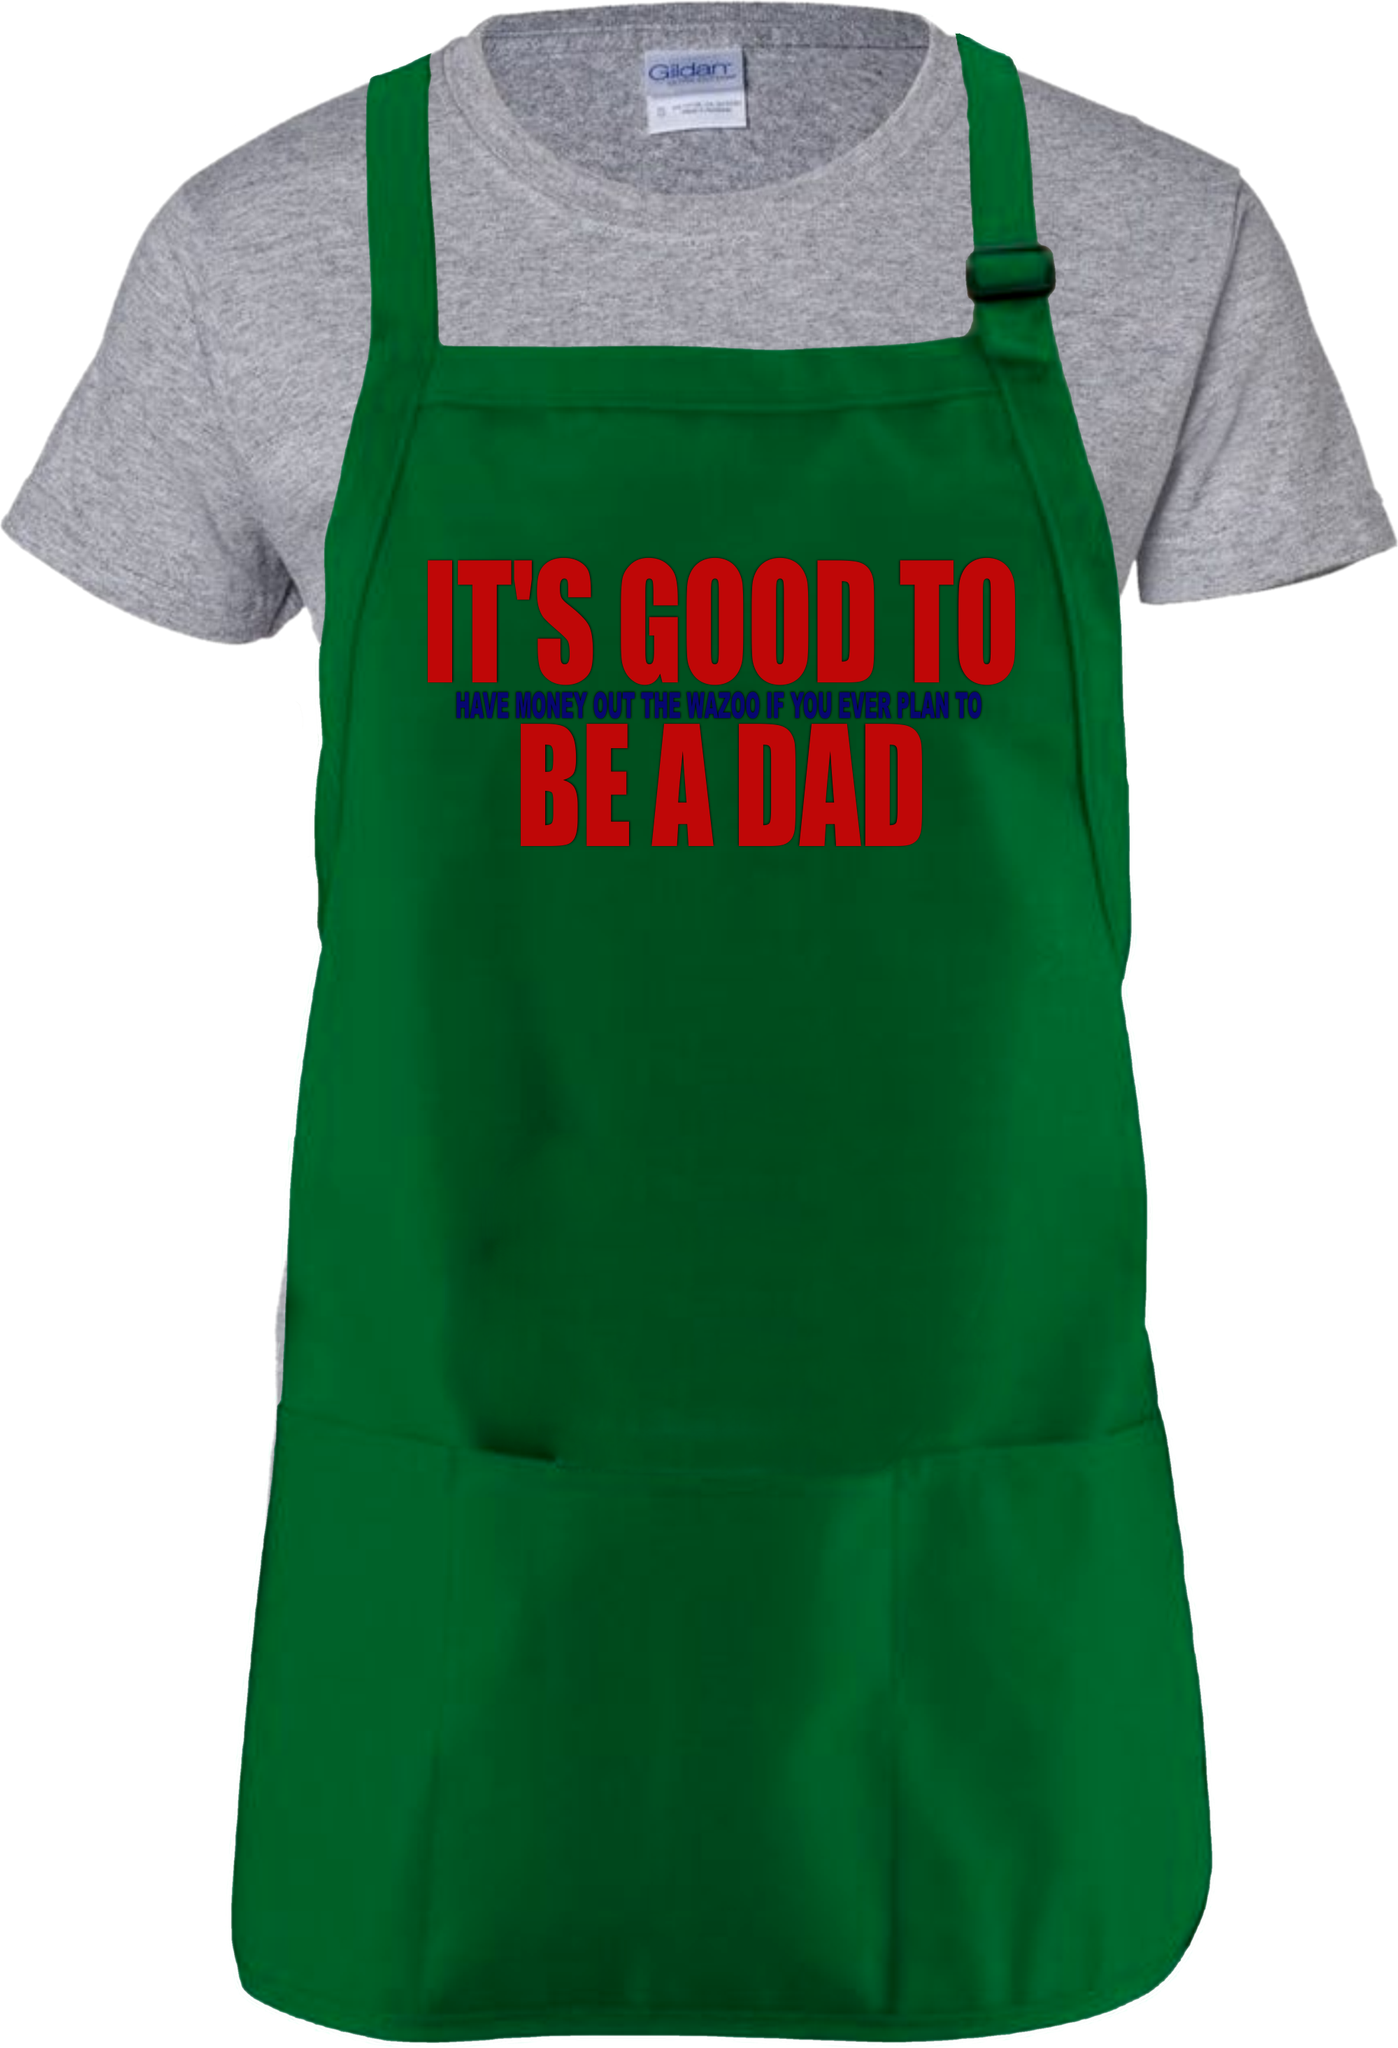 Shabba Stevo Clothing Funny BBQ Apron Novelty Aprons Cooking Gifts for